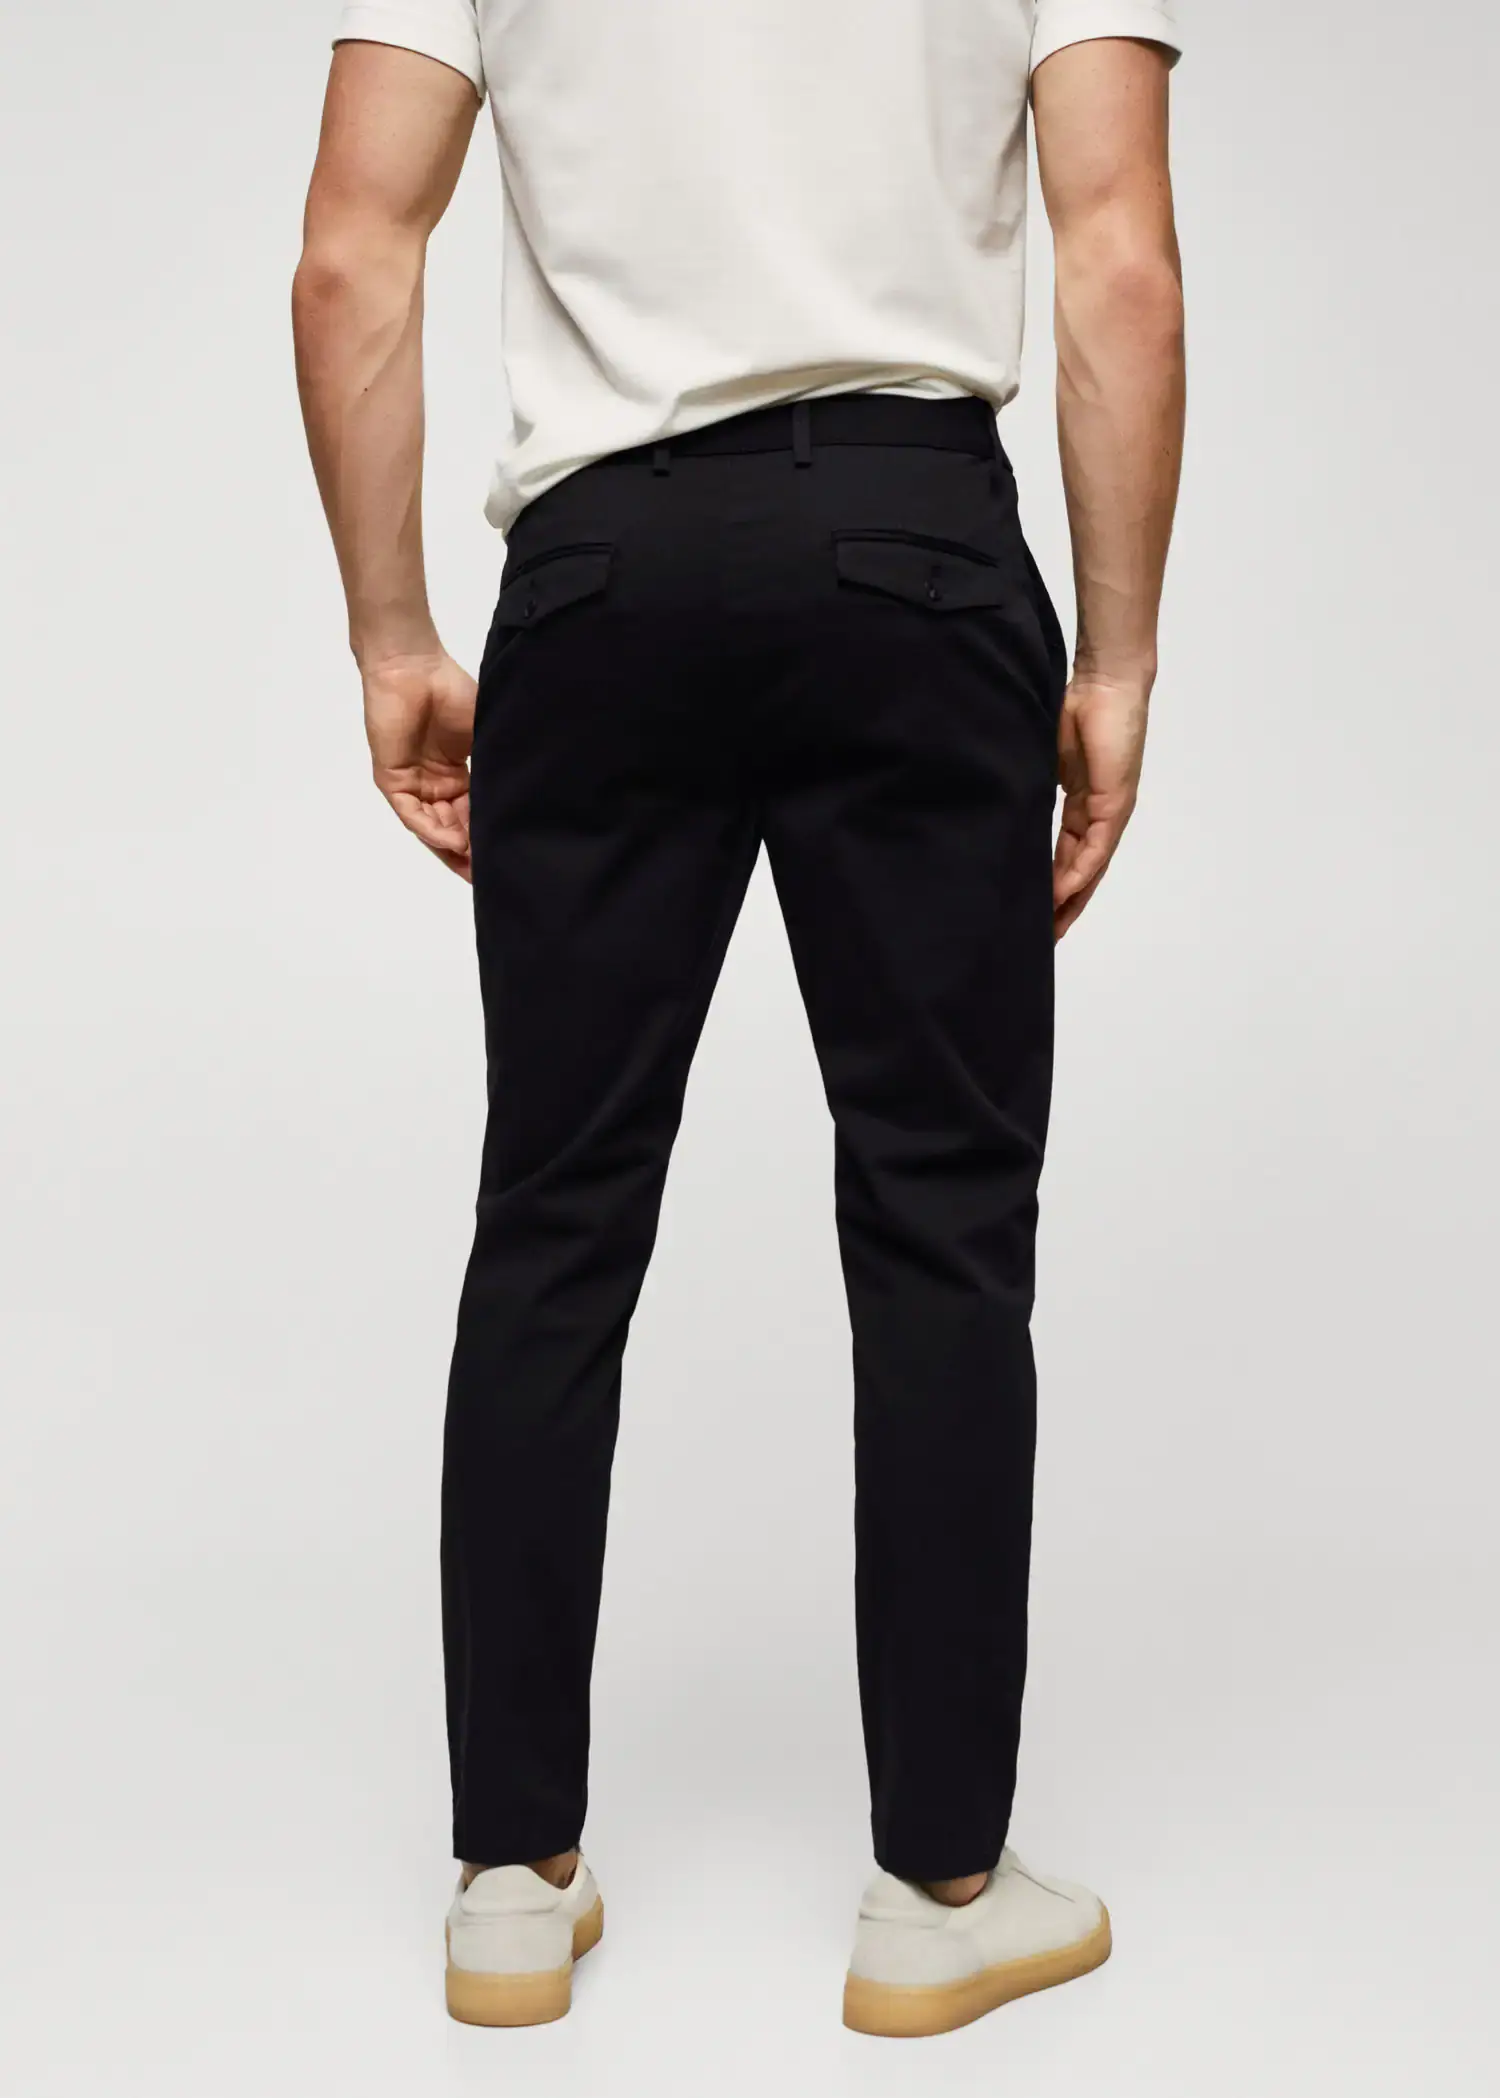 Mango Cotton tapered crop pants. a man wearing black pants and a white t-shirt. 